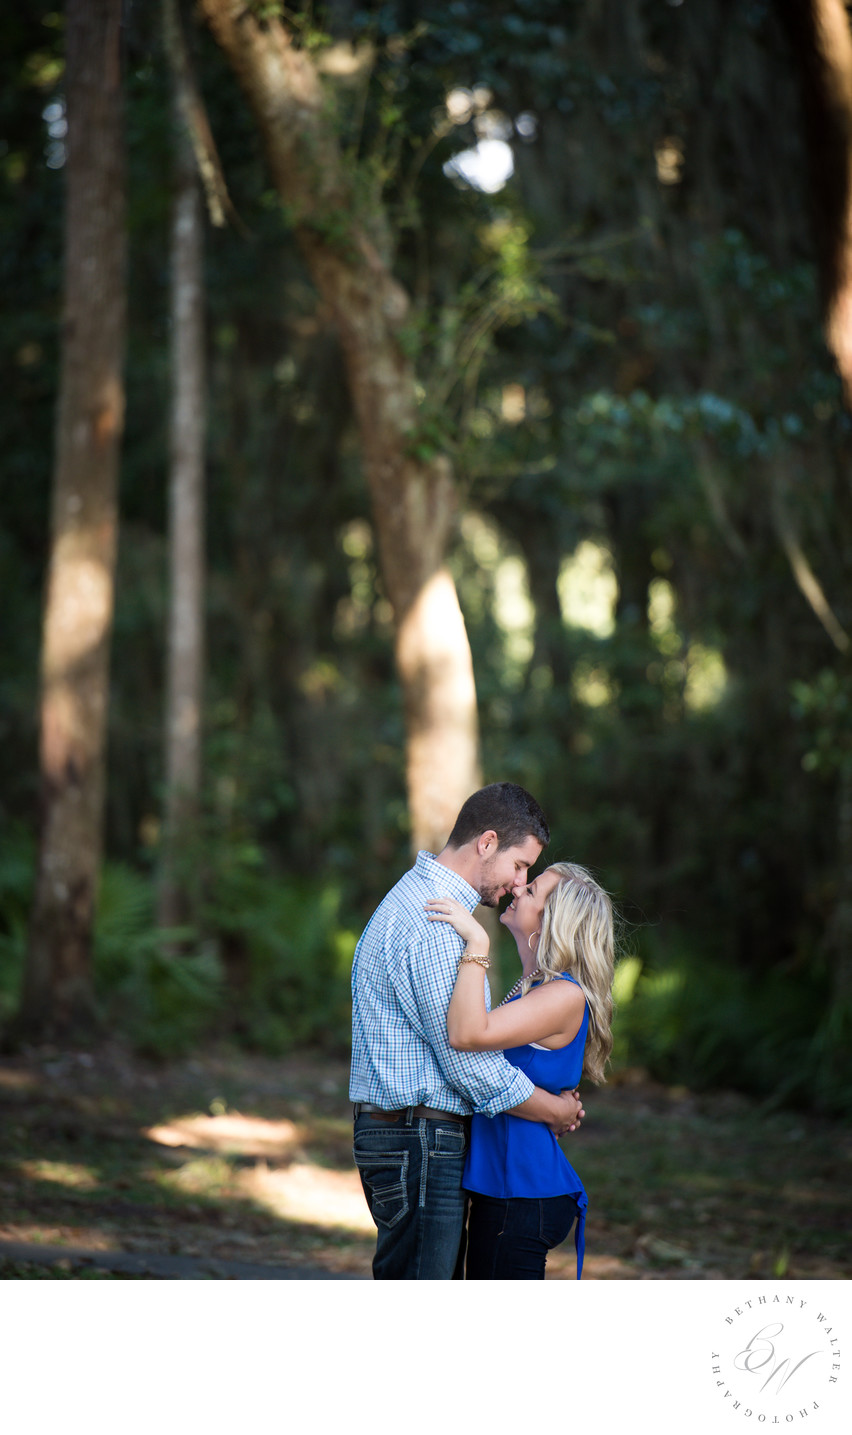 Engaged Couple Embraced During Engagement Session 